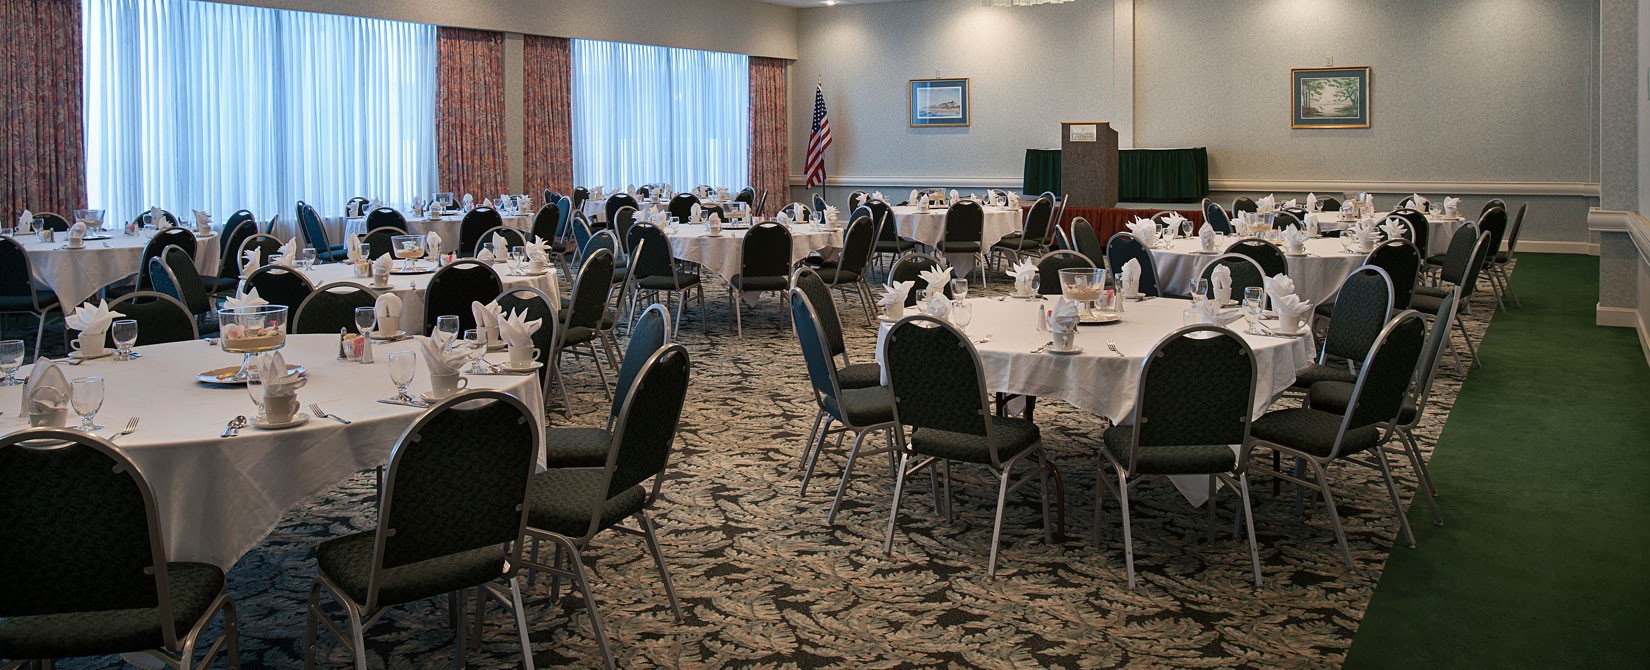 Landmark Resort meeting or conference room with tables and podium set up